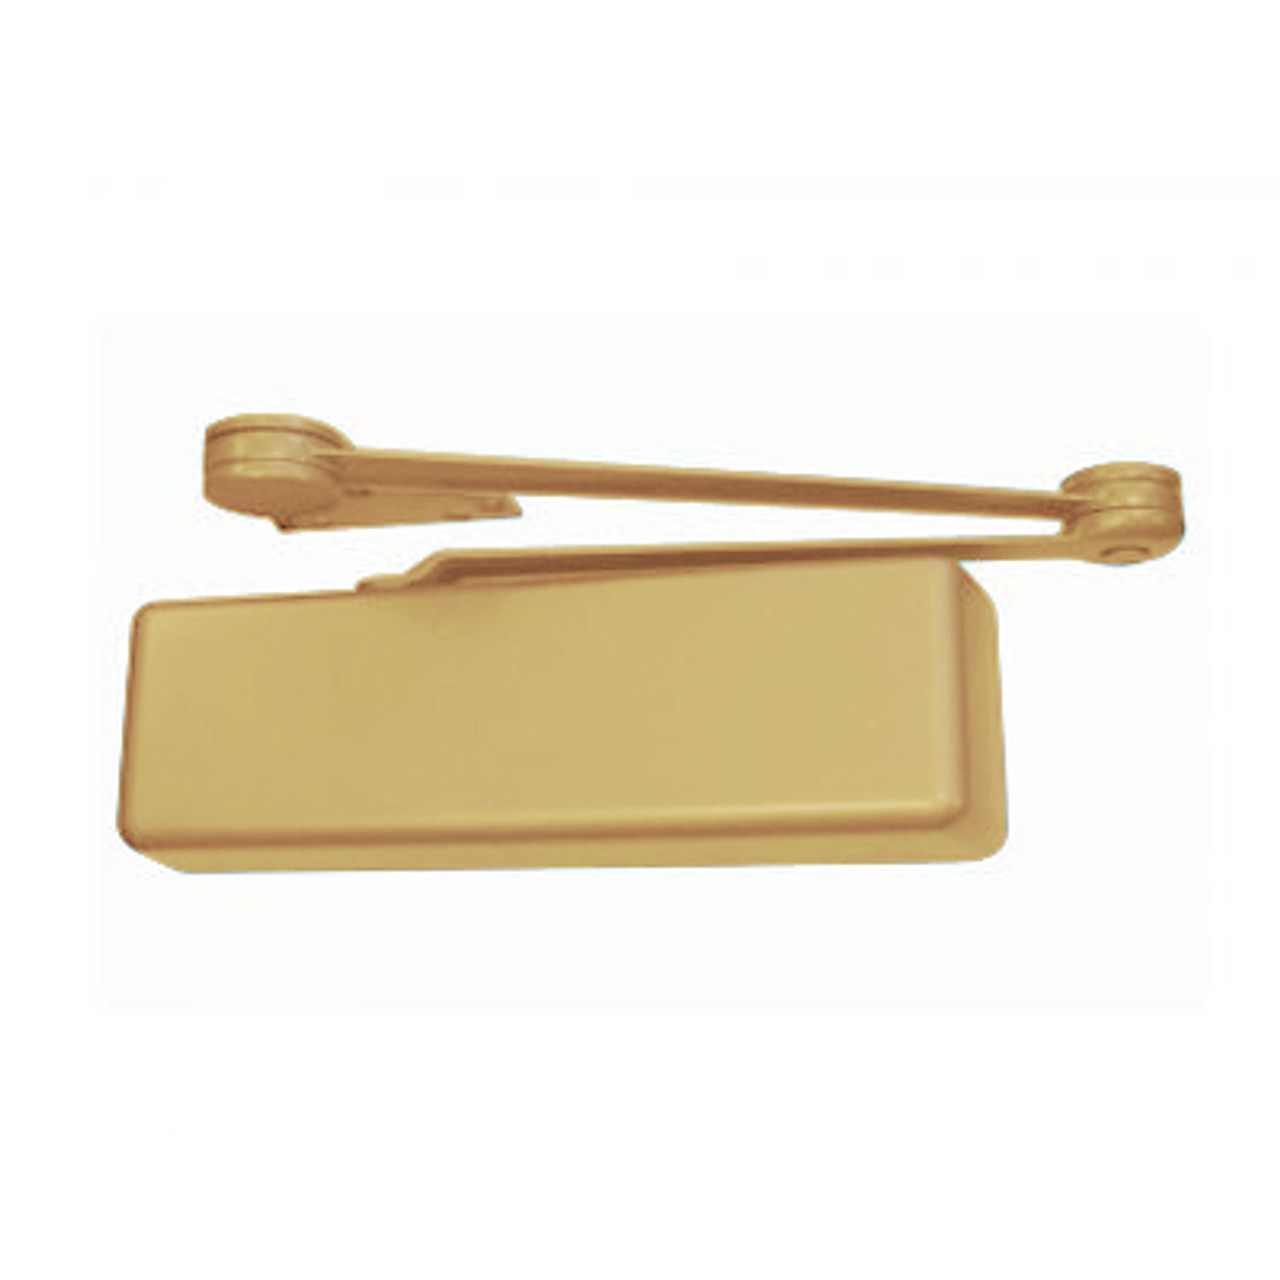 4114T-H-RH-US4 LCN Door Closer with Hold-Open Arm in Satin Brass Finish